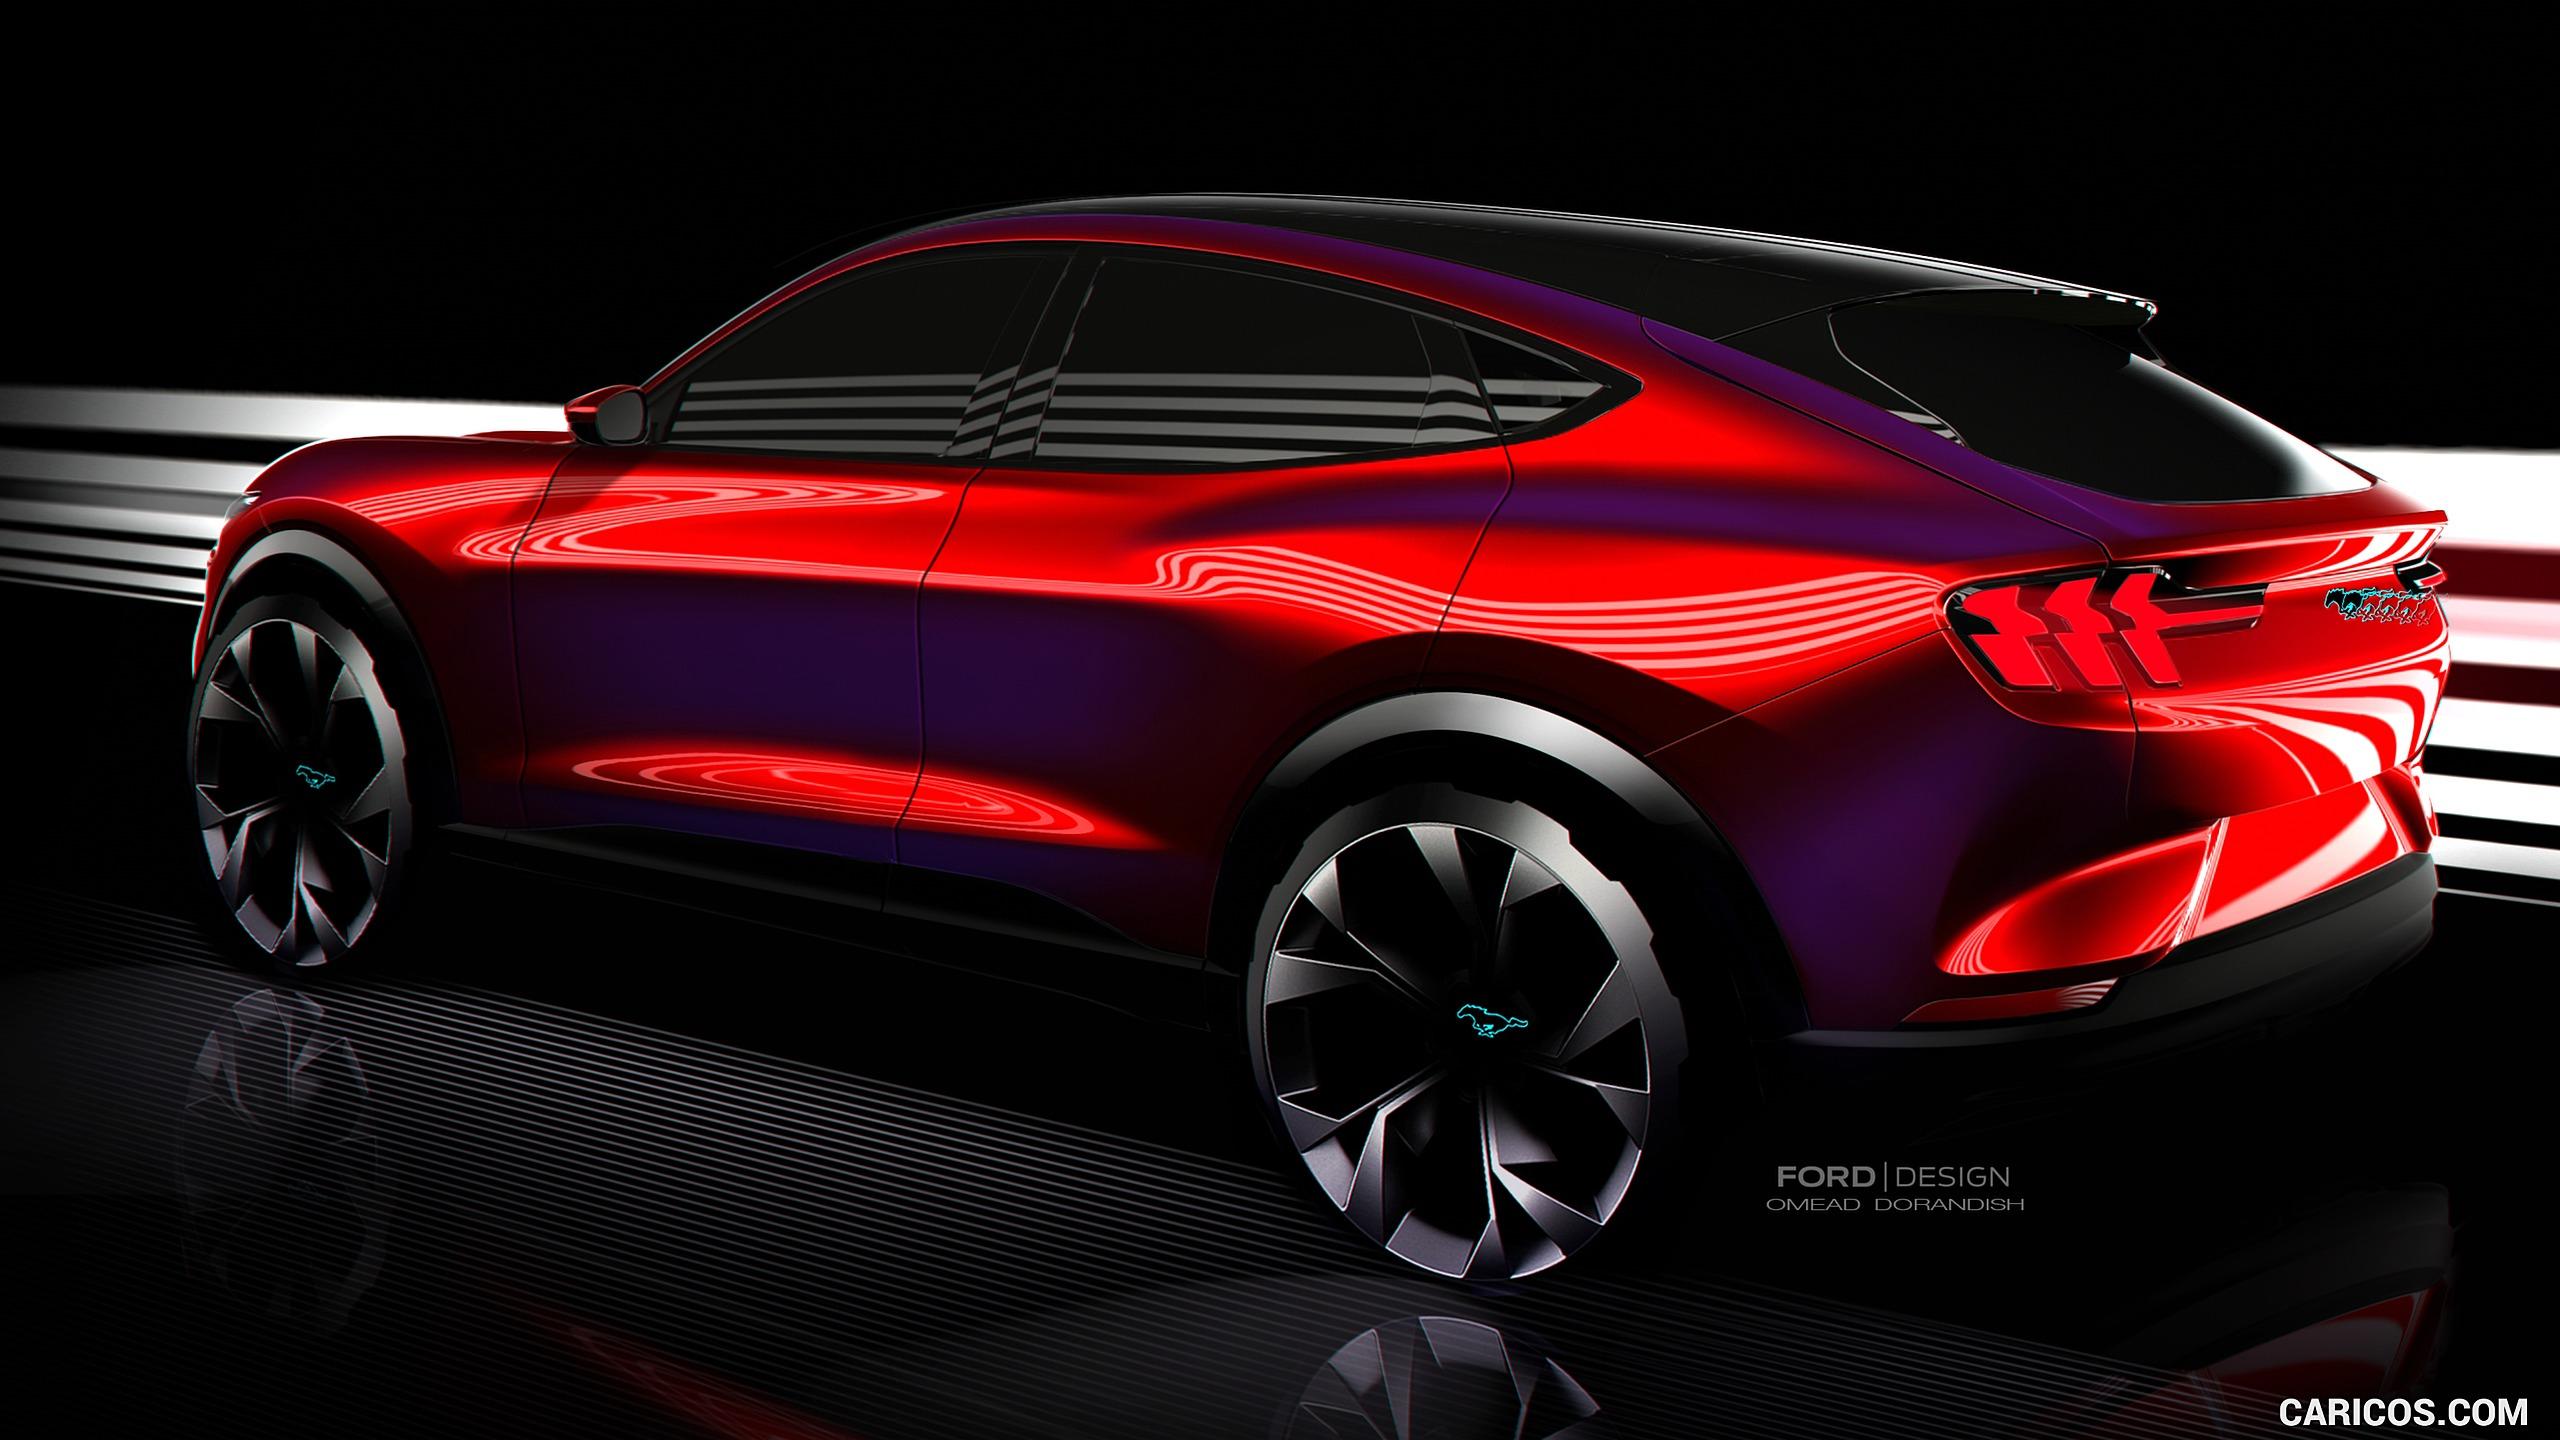 Ford Mustang Mach E Electric SUV Sketch. HD Wallpaper